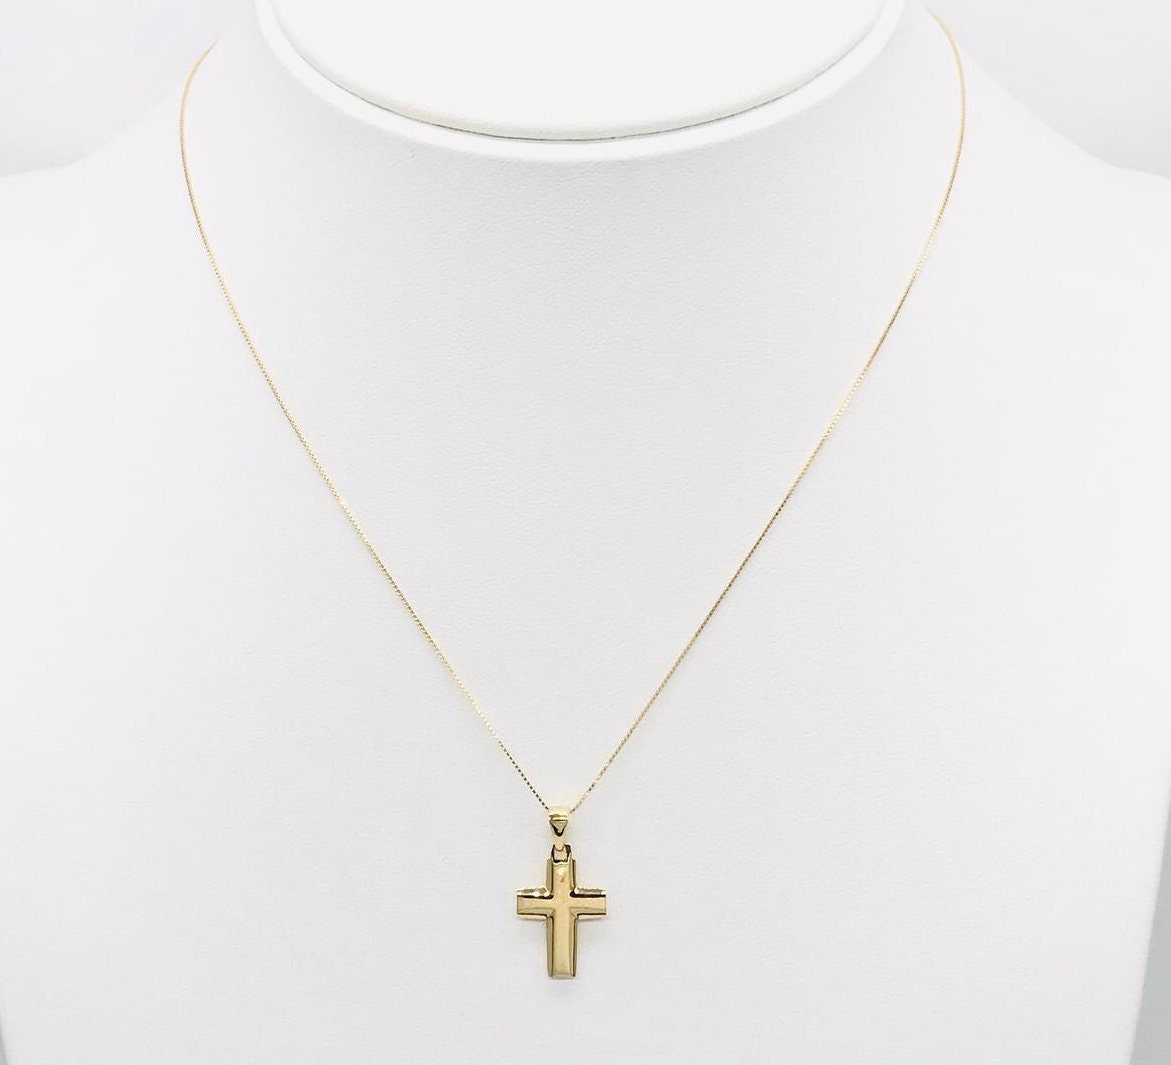 18K Gold Christian Cross Necklace Chain With Jesus Religious Italian